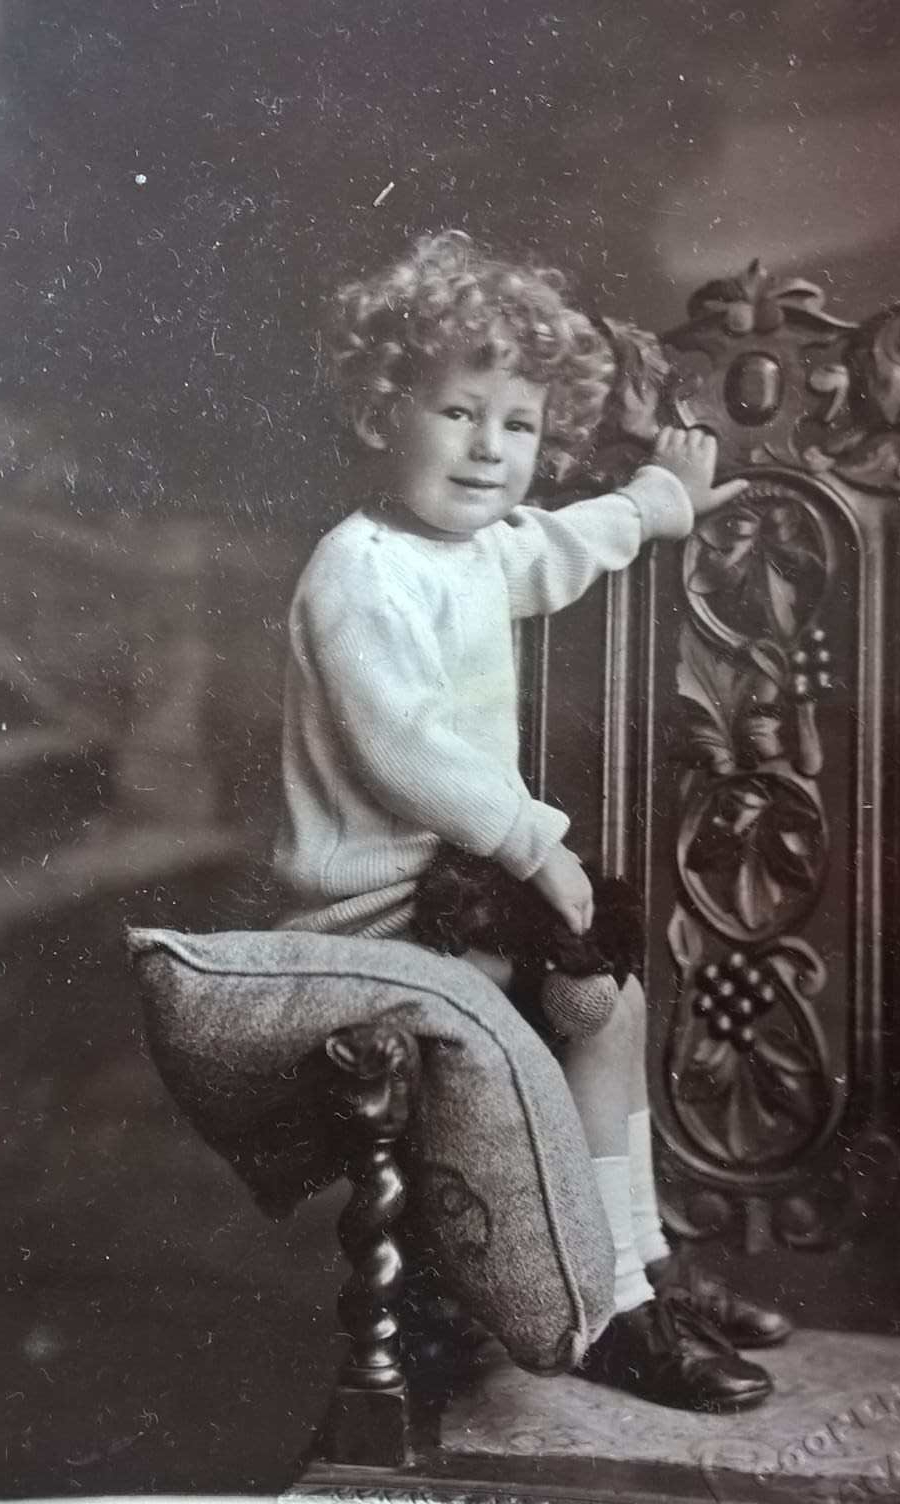 RJ McConnell pictured as a young child